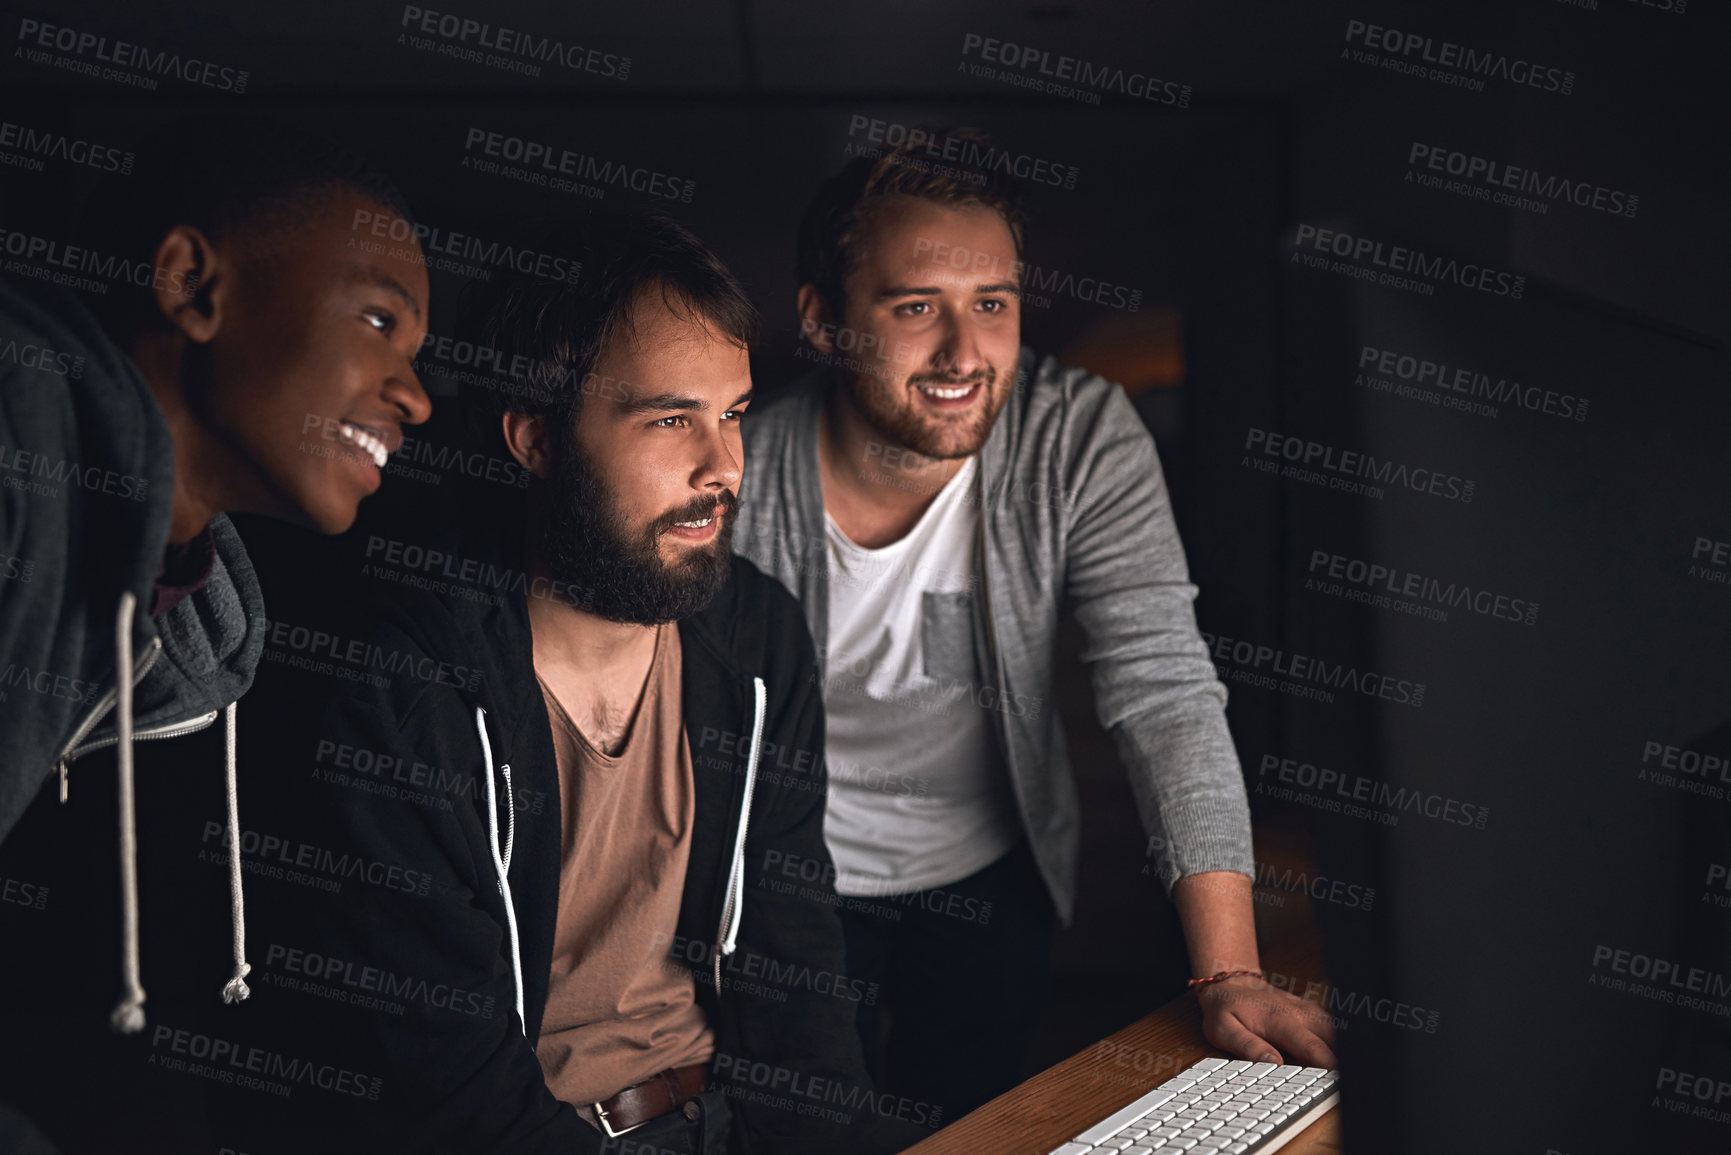 Buy stock photo Cropped shot of young computer programmers working late in the office